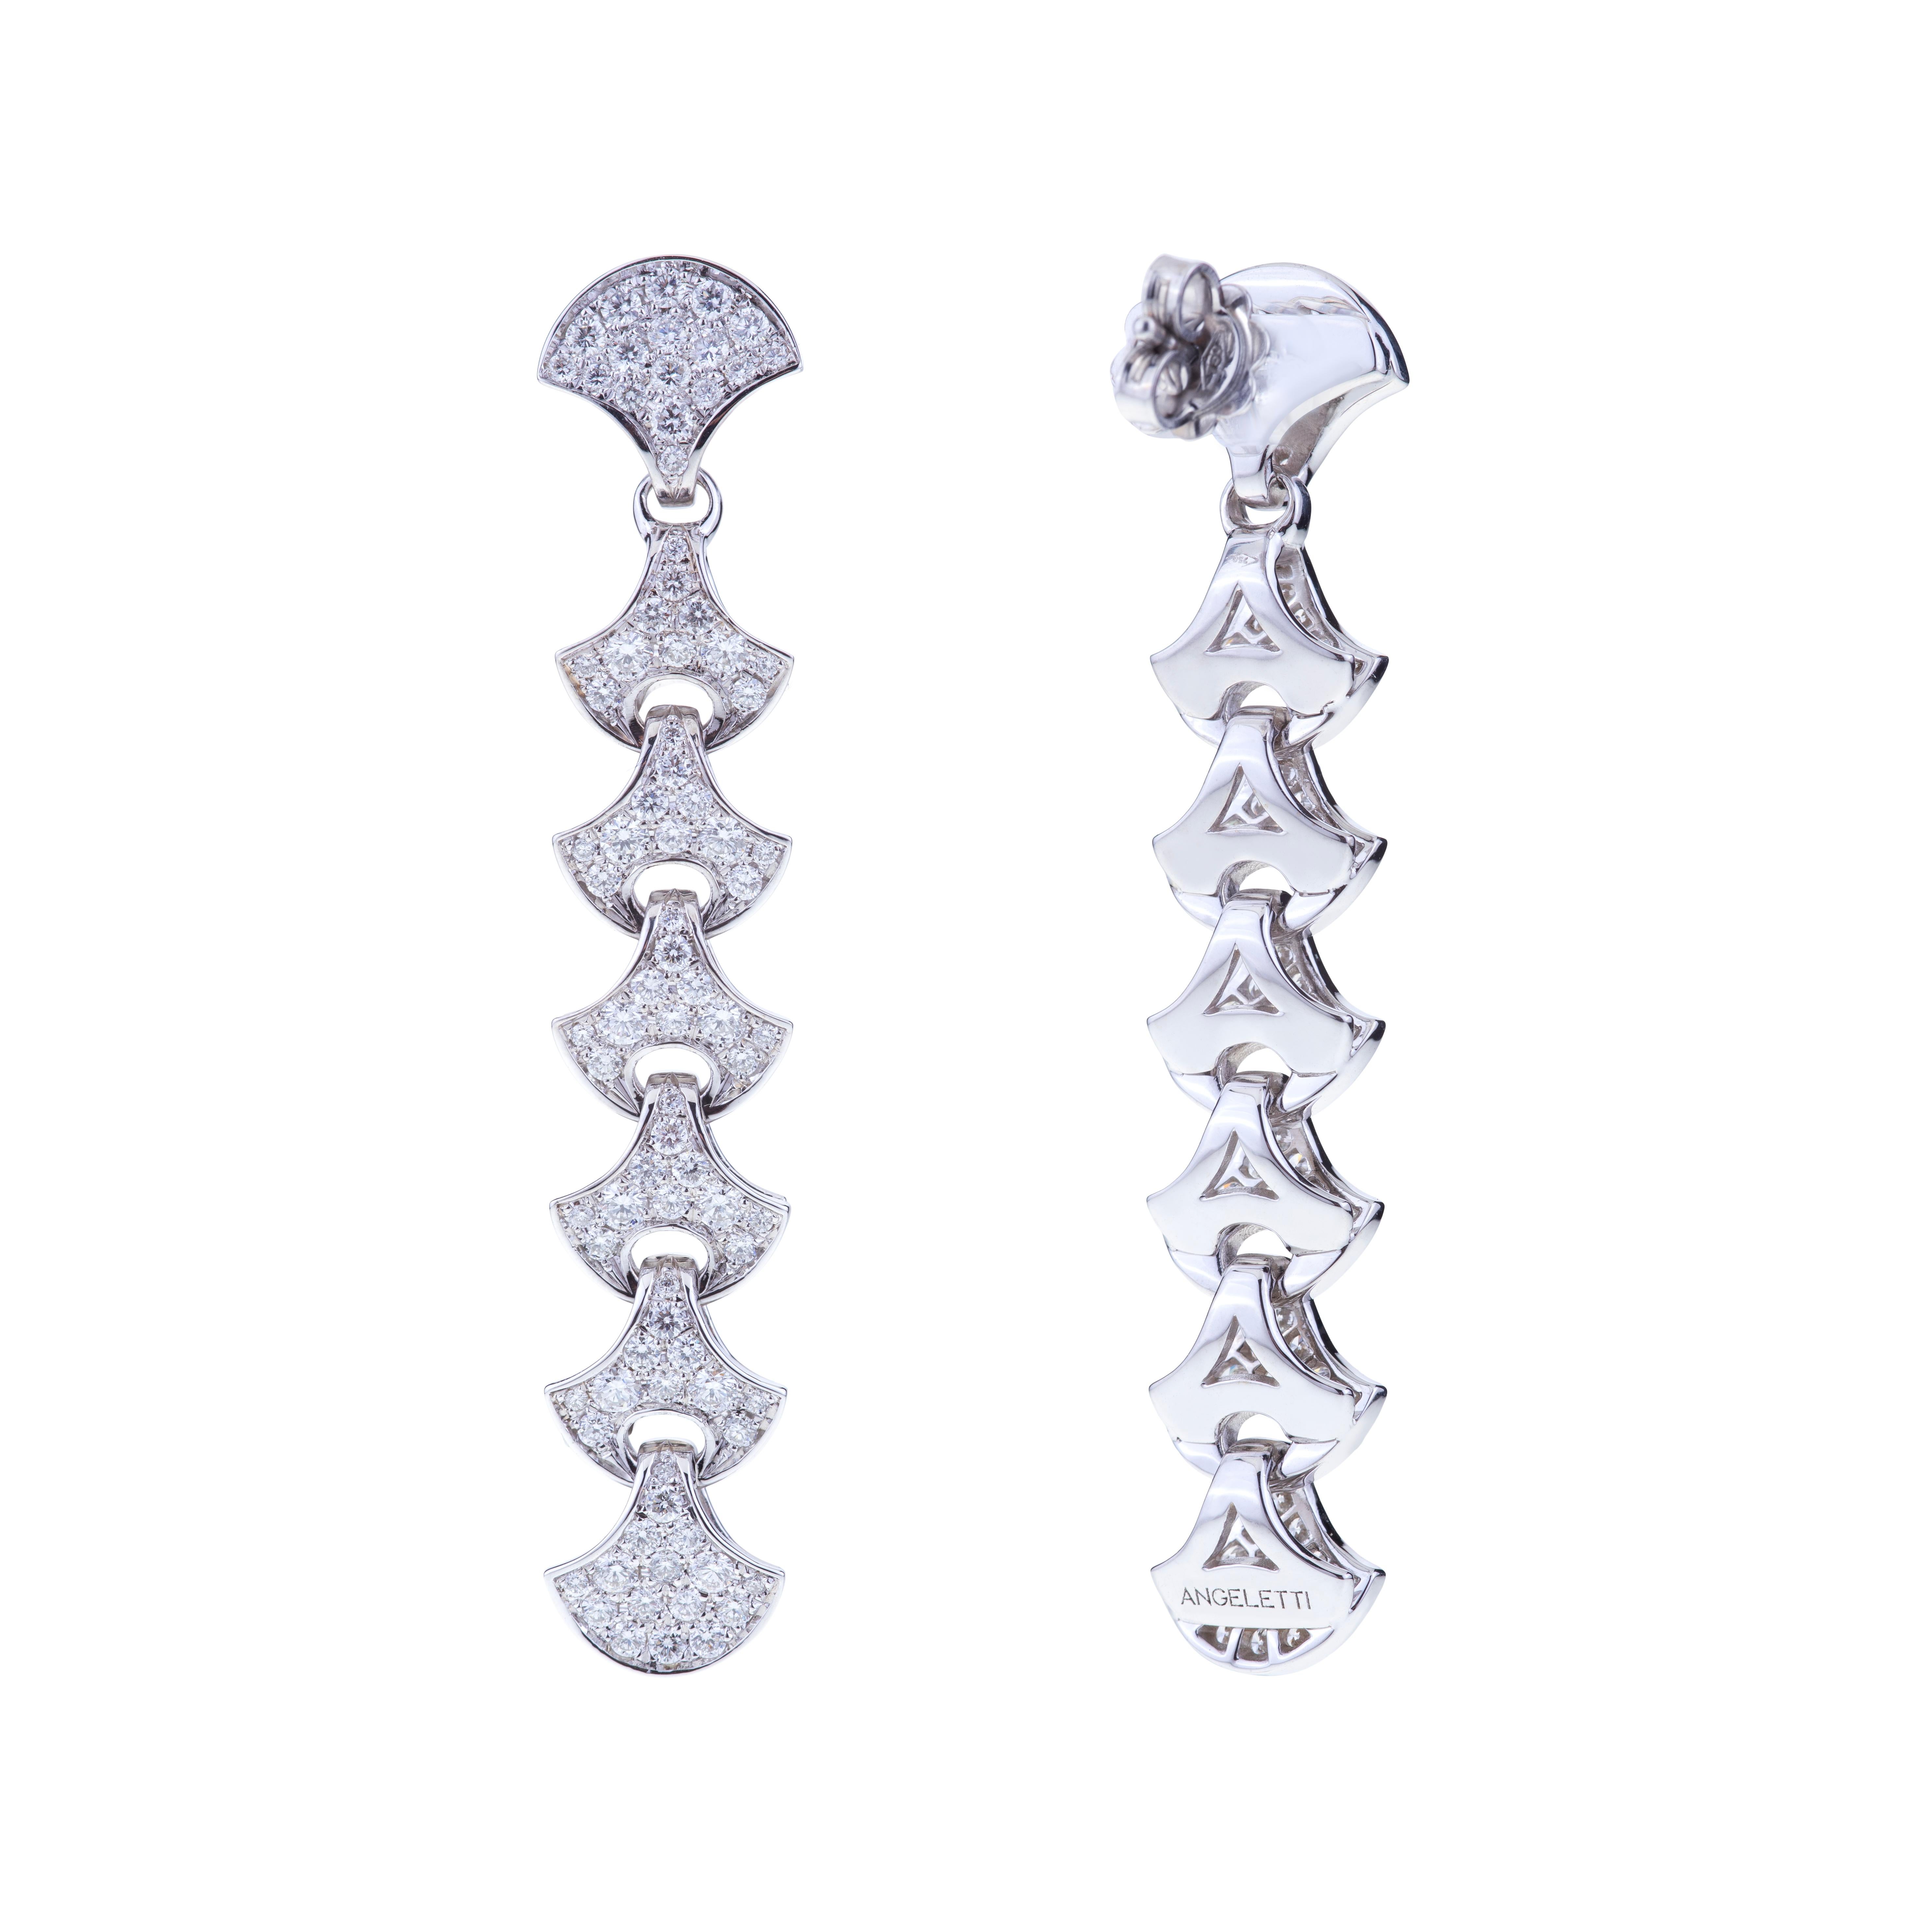 Modern Wave Tennis Earrings by Angeletti White Gold with Fan Shaped Gold and Diamonds For Sale